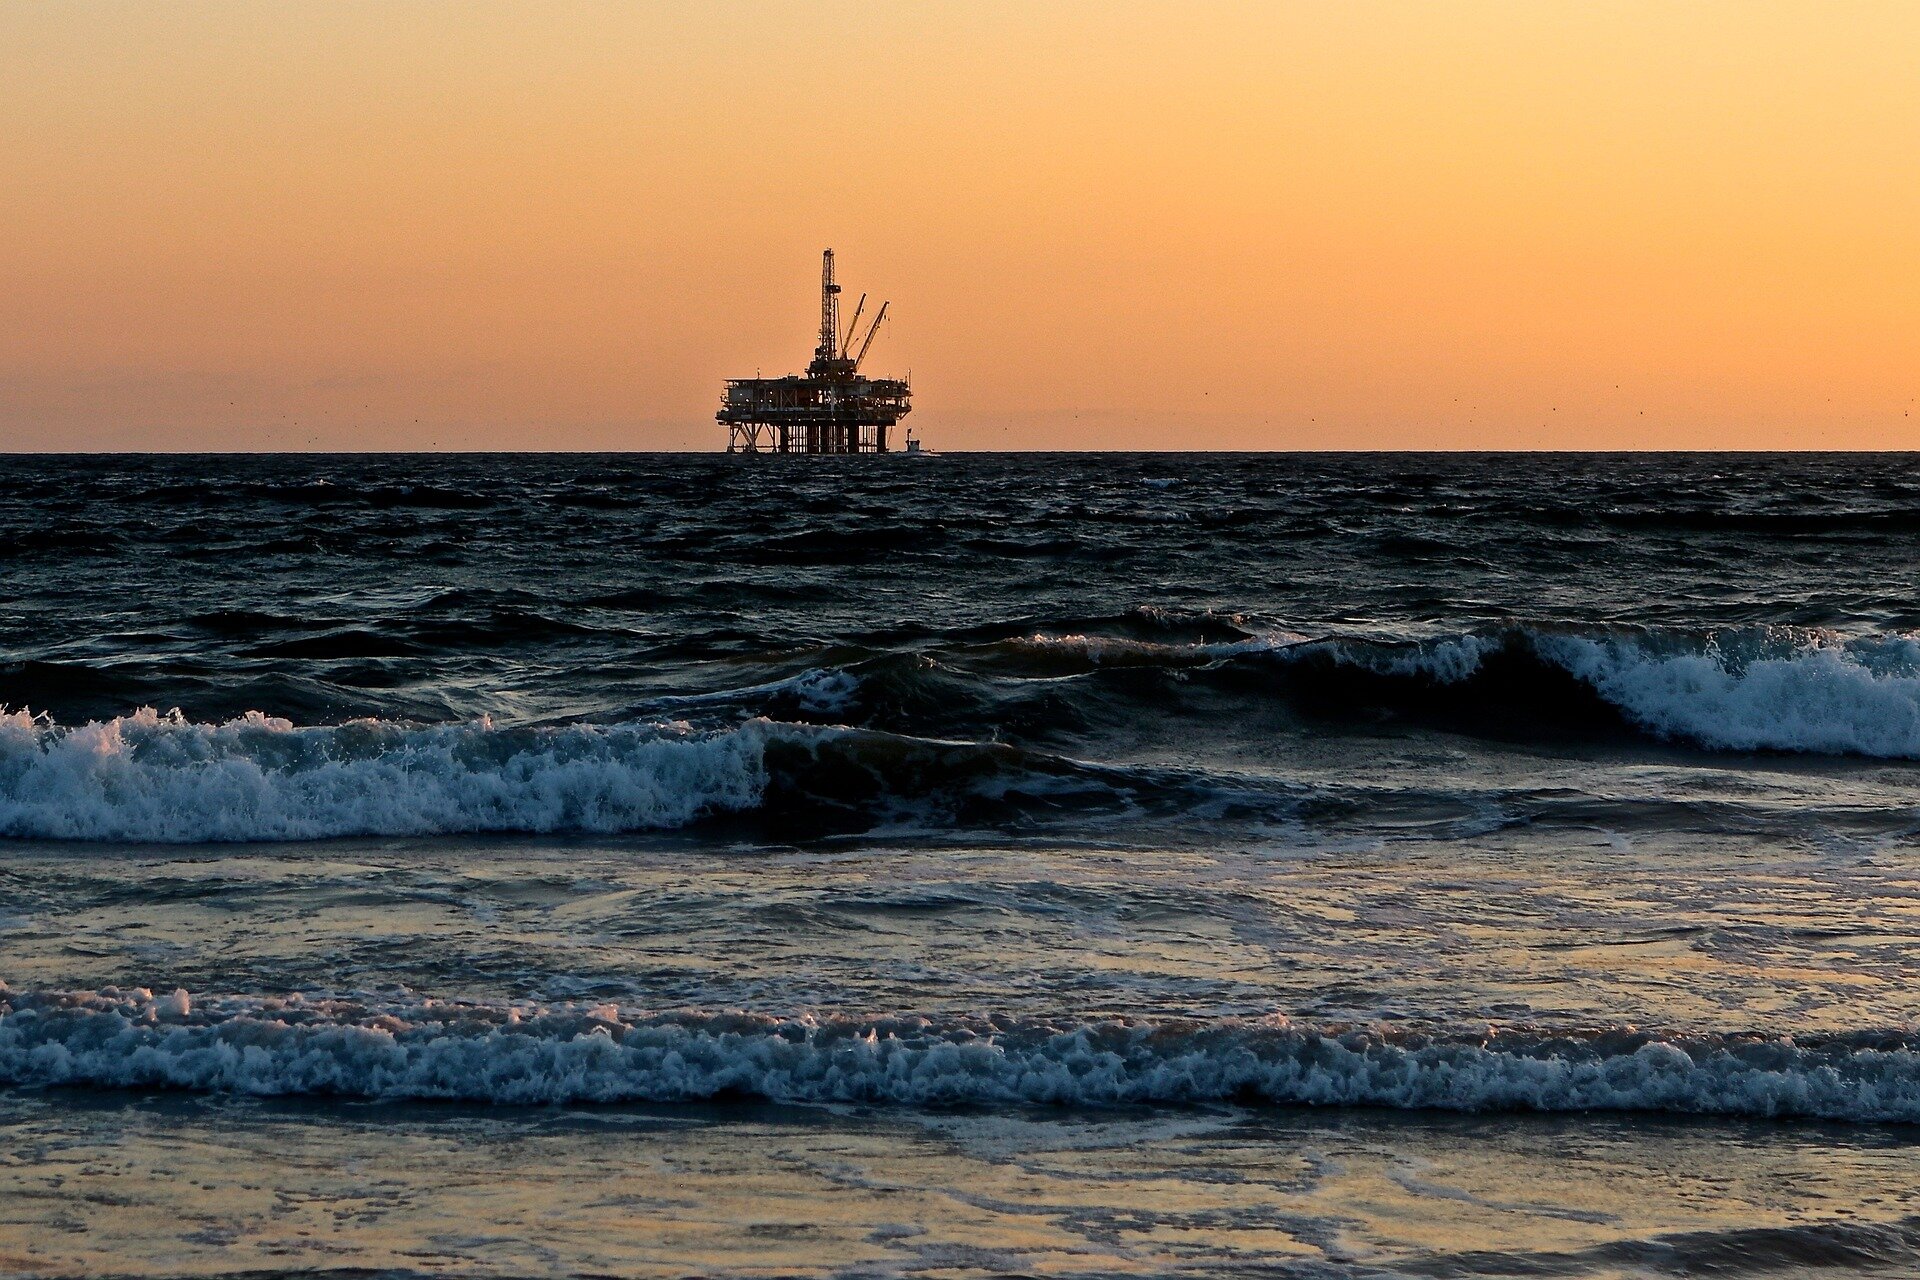 Researchers urge investigation into possible consequences of decommissioned offshore structures